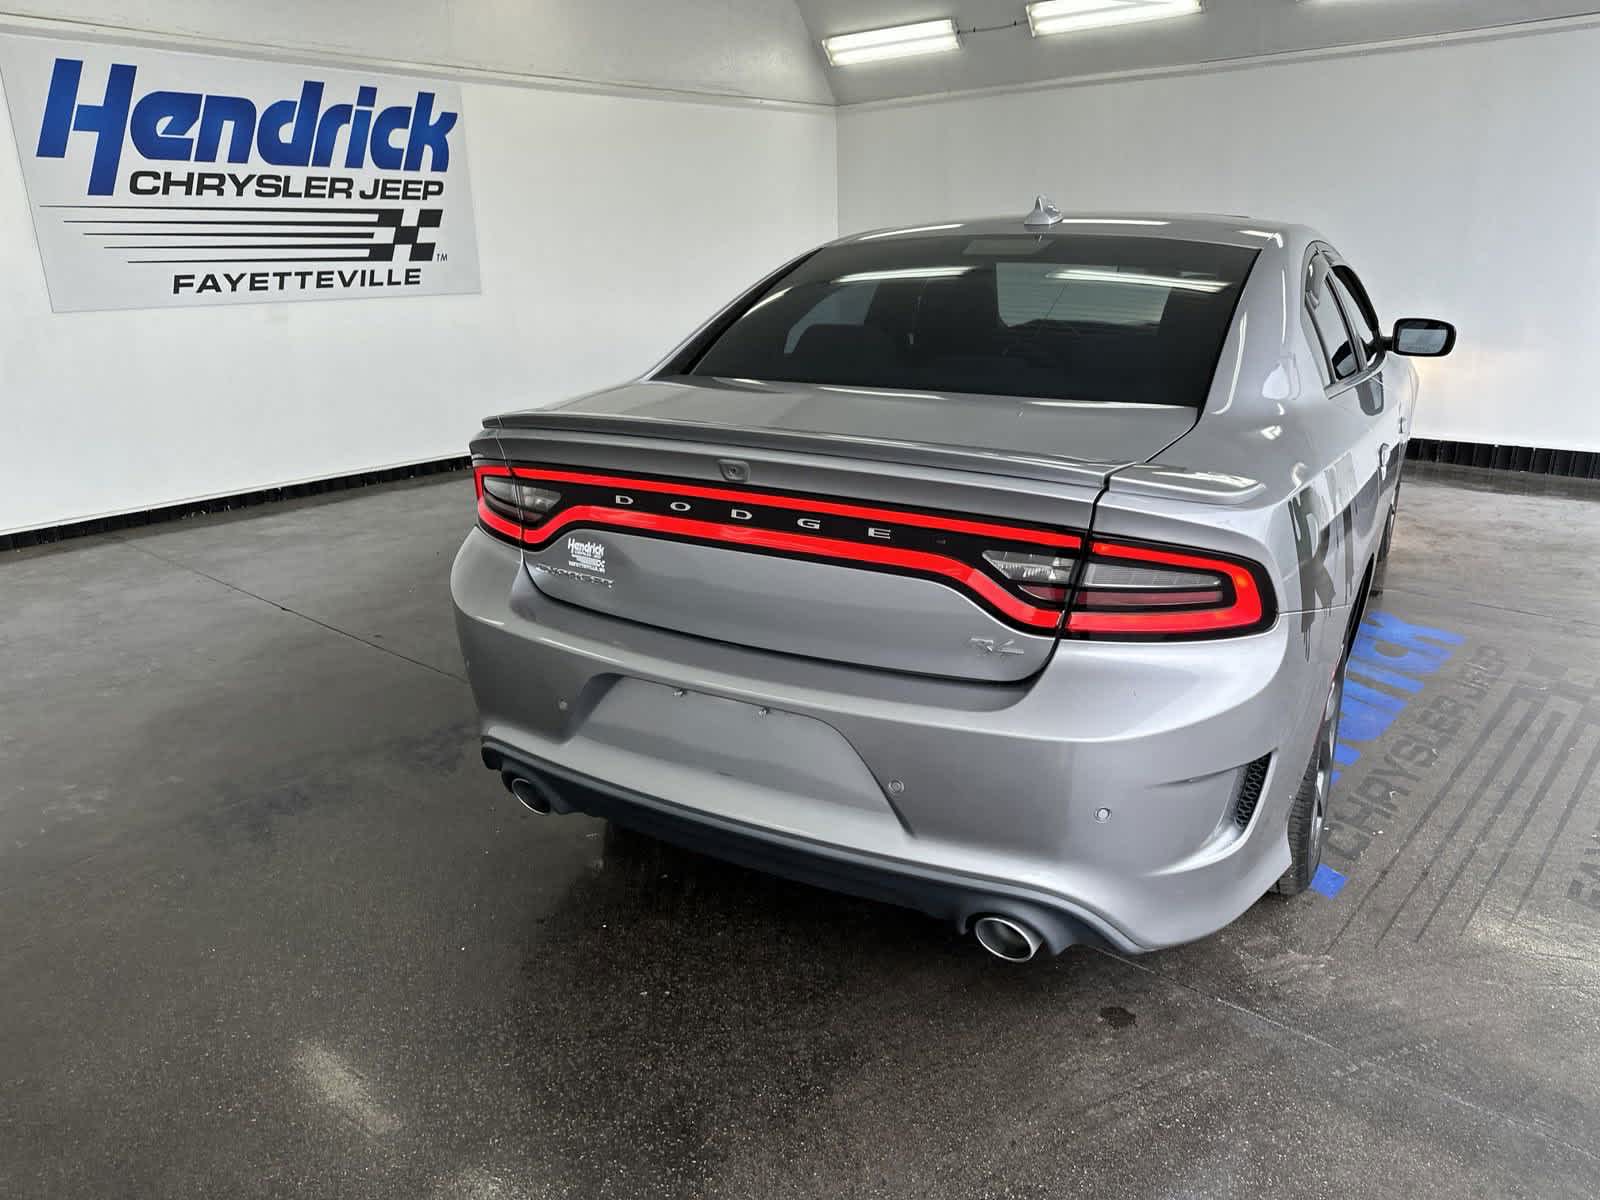 2018 Dodge Charger R/T 8